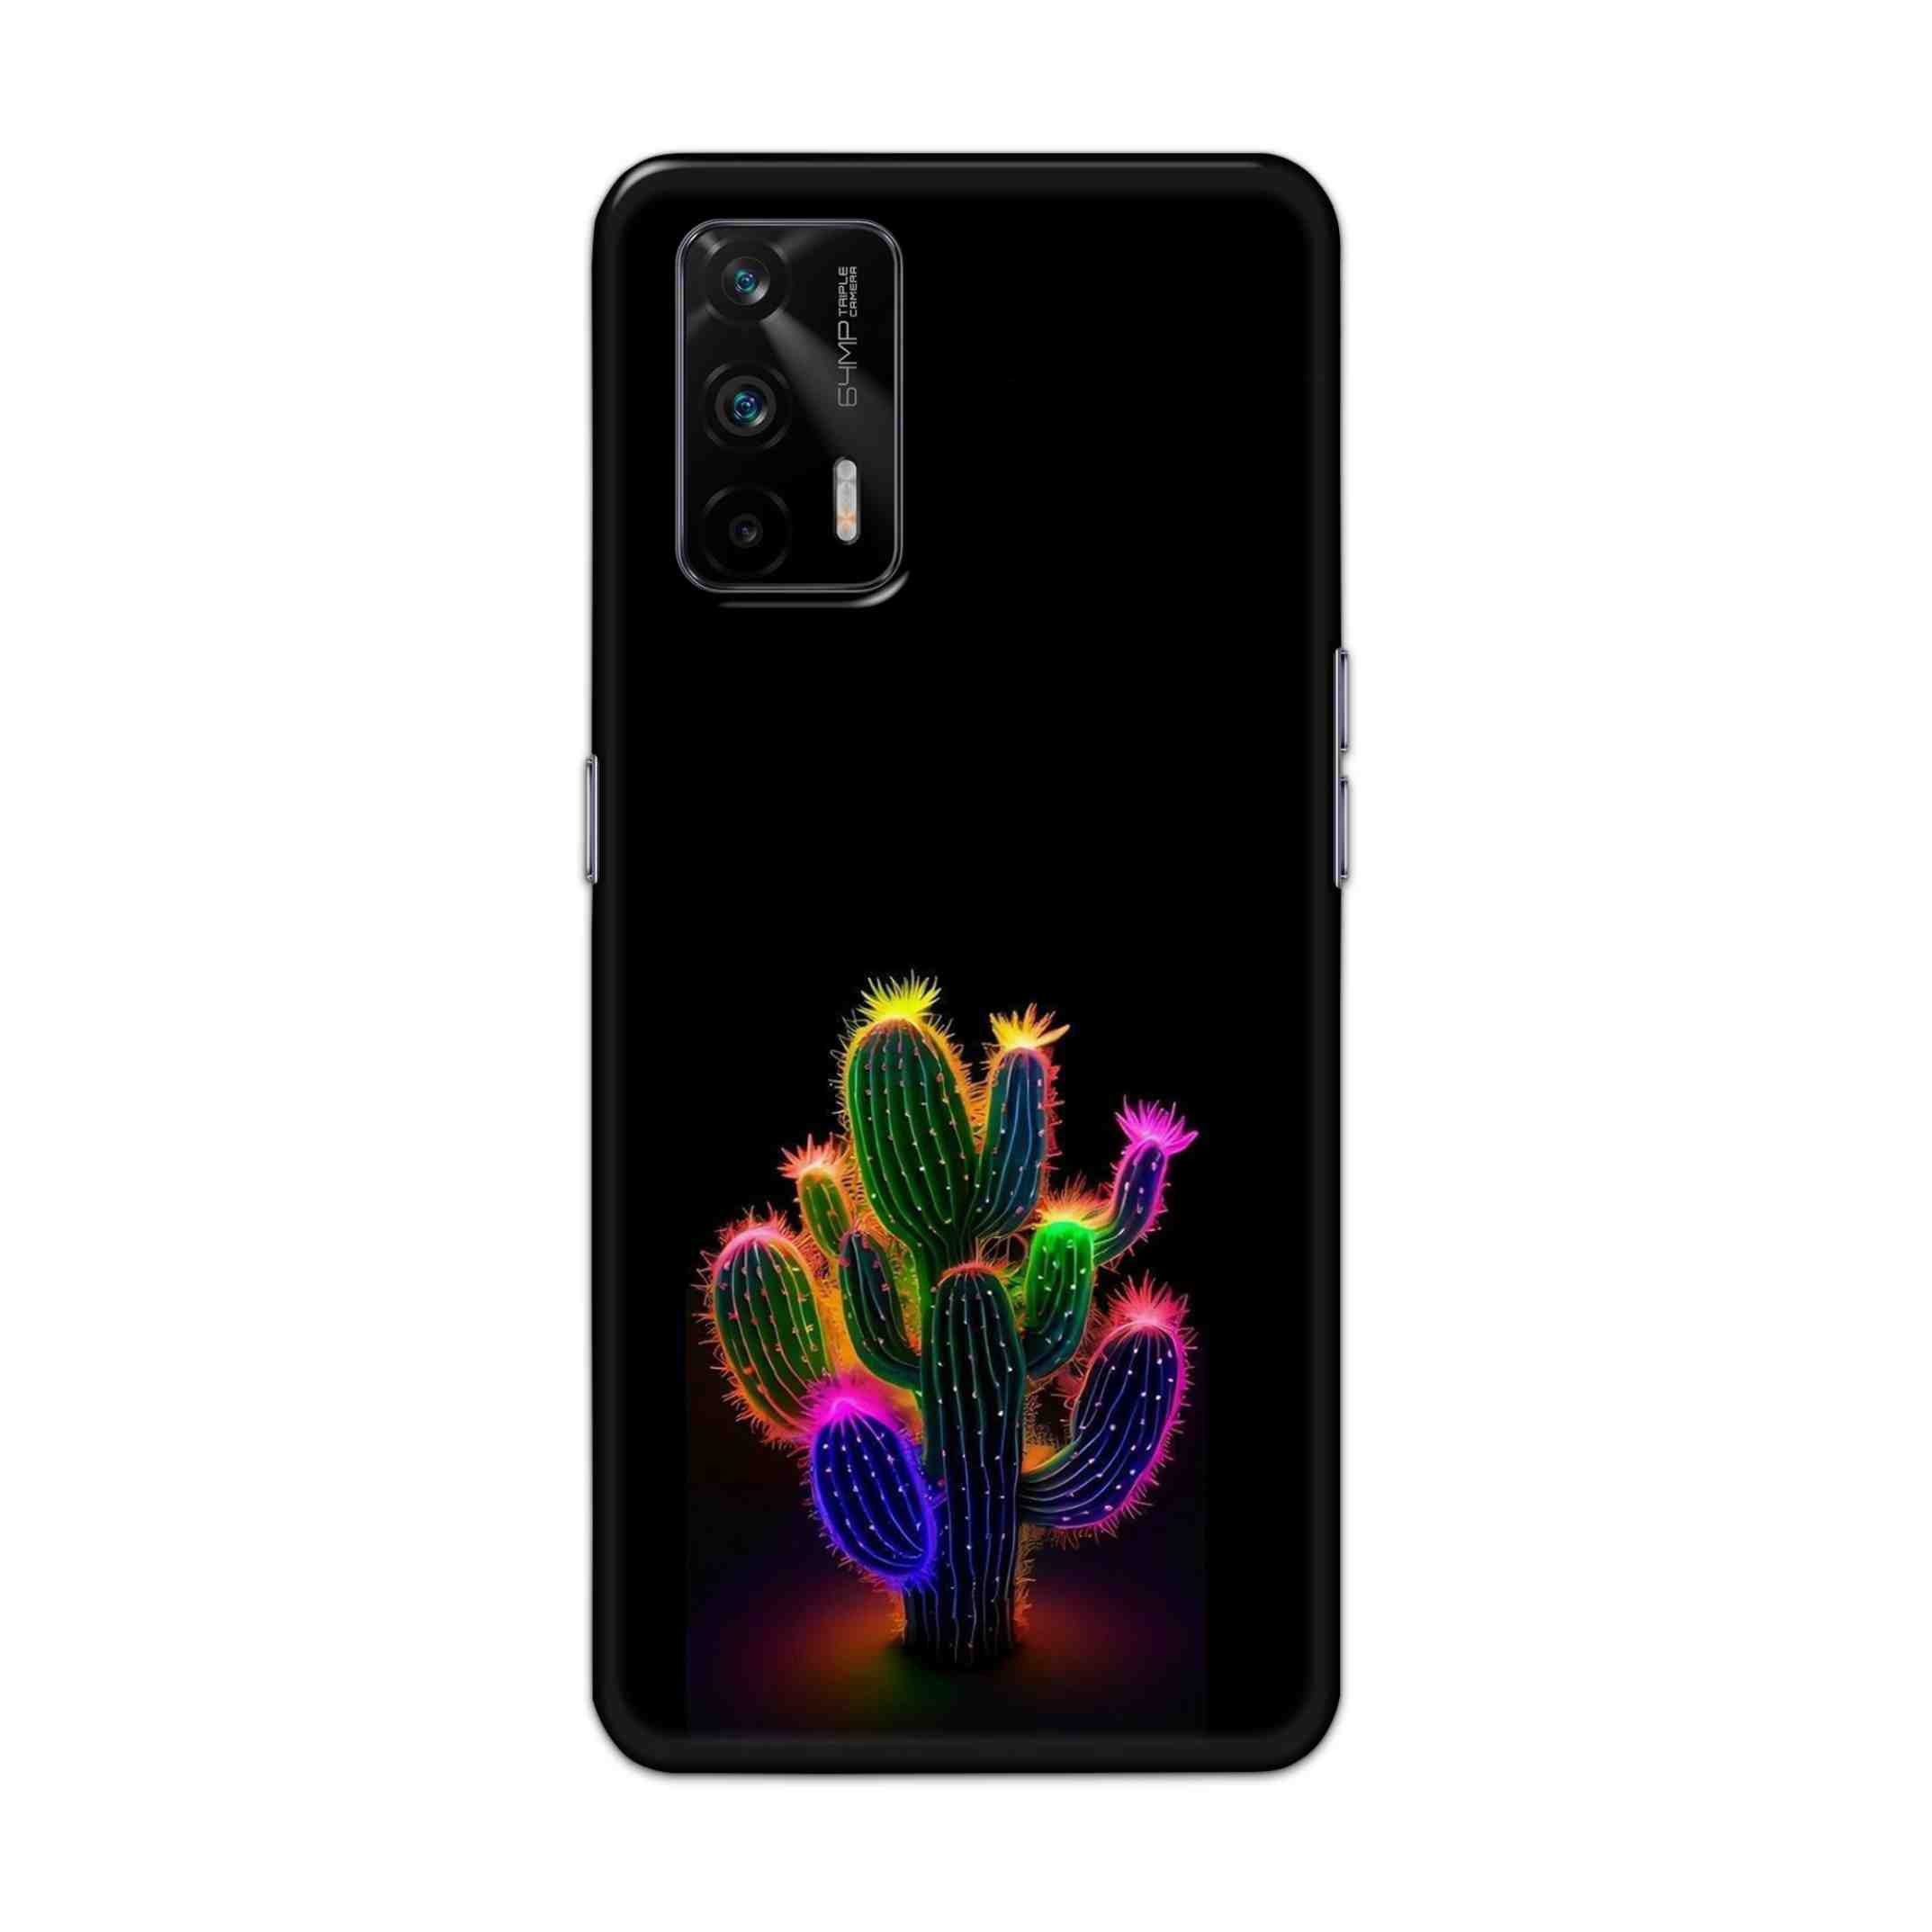 Buy Neon Flower Hard Back Mobile Phone Case Cover For Realme X7 Max Online